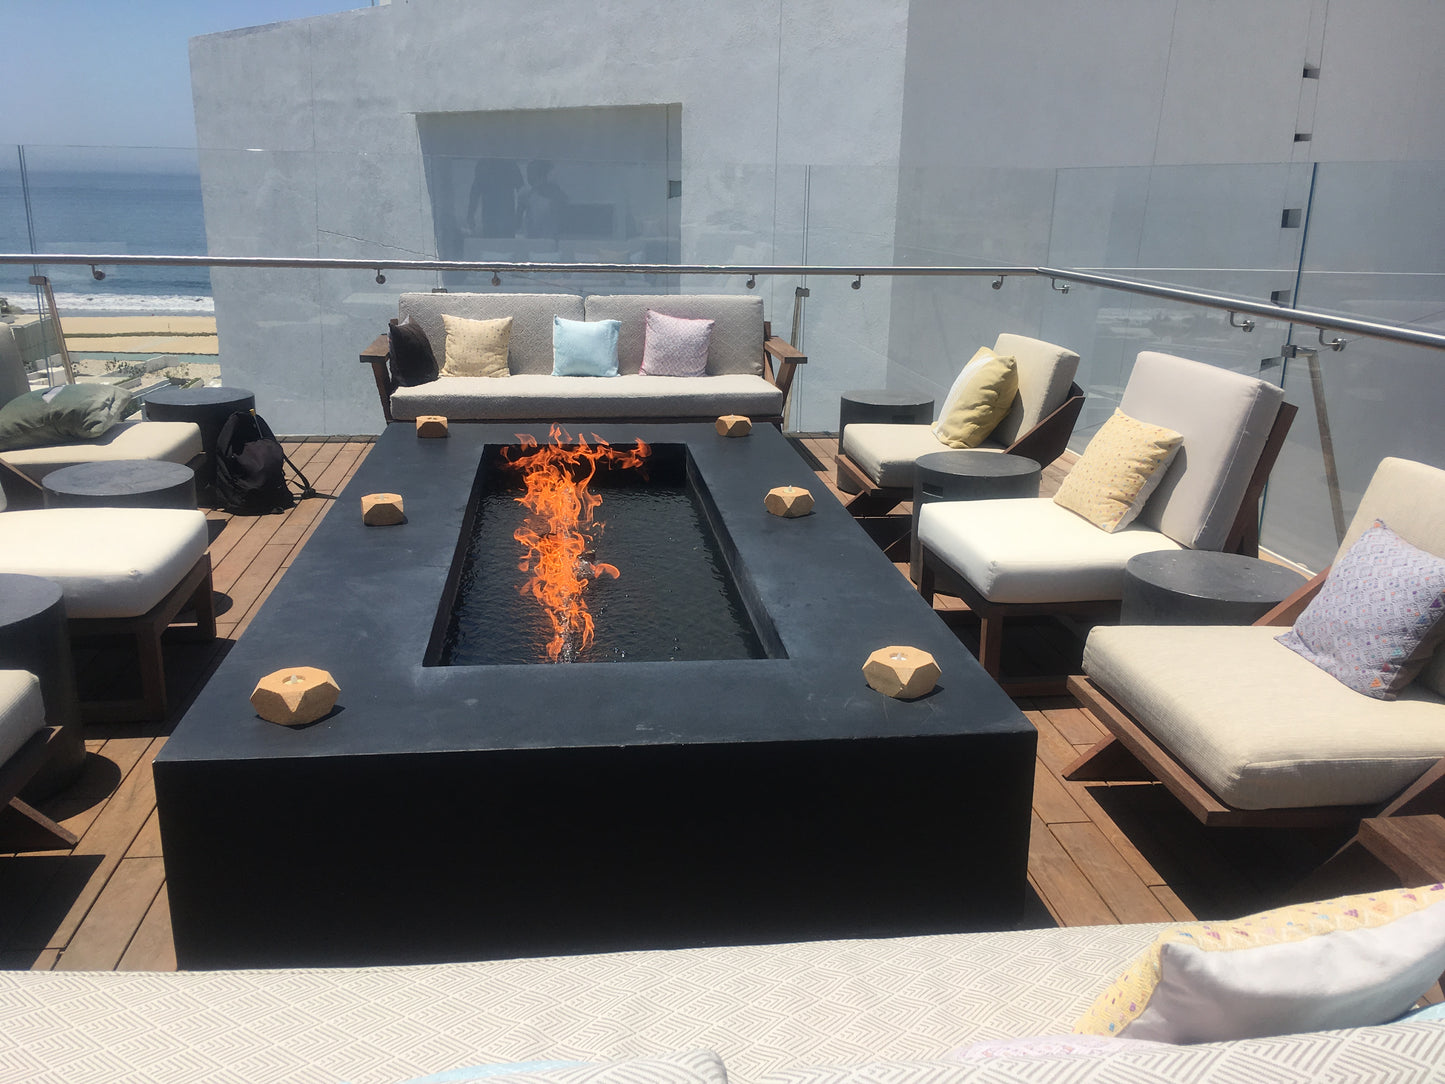 The Outdoor Plus Regal Metal Fire Pit - Free Cover